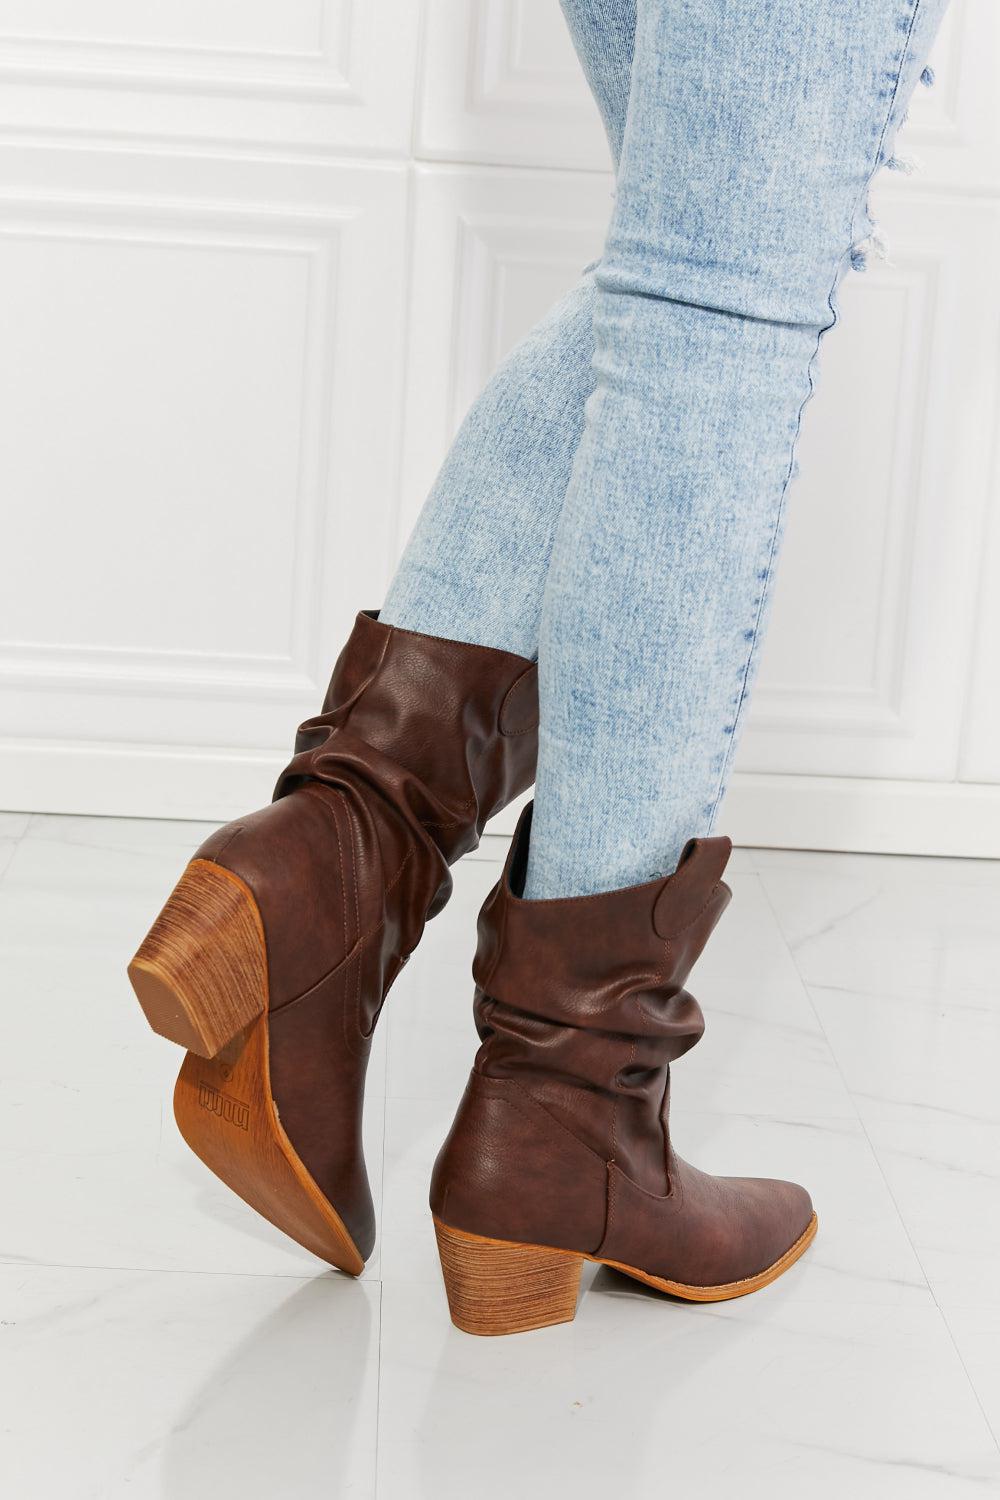 MMShoes Better in Texas Scrunch Cowboy Boots in Brown BLUE ZONE PLANET